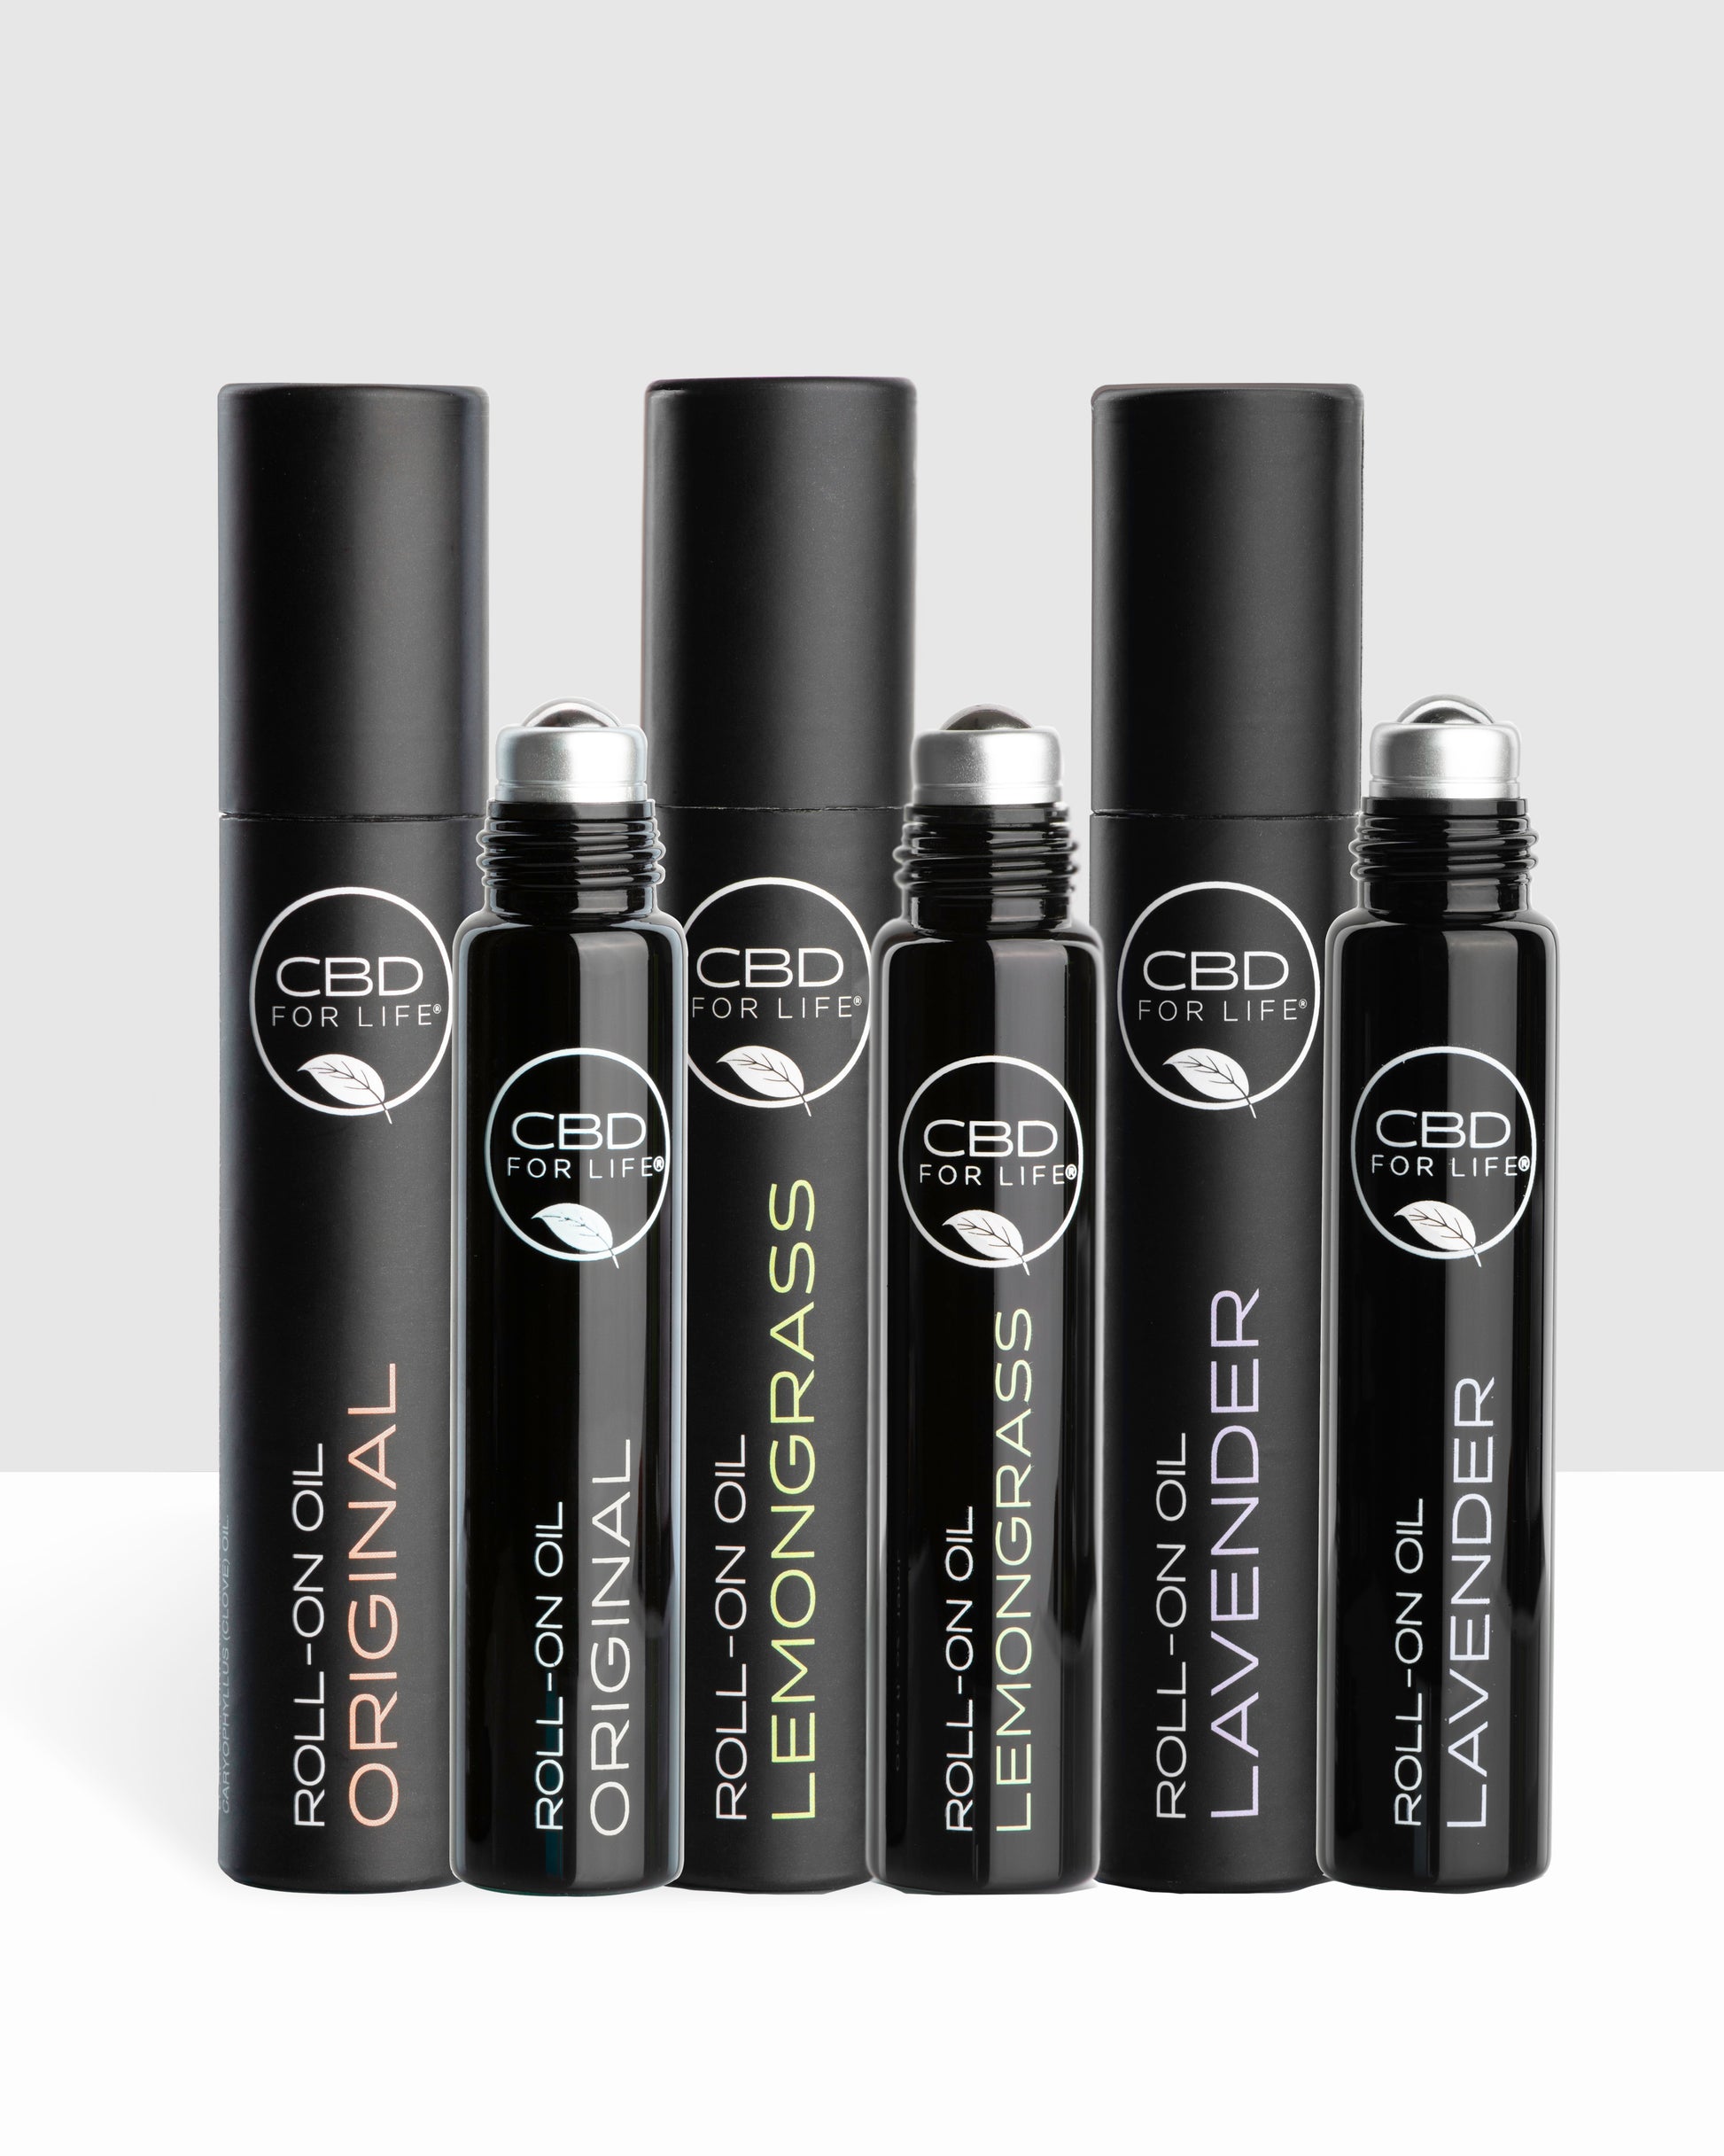 A note for the CBD Roll-On obsessed: We created a CBD Roller Set with all three of our CBD topical roll-on oils.. All three scents at a savings price